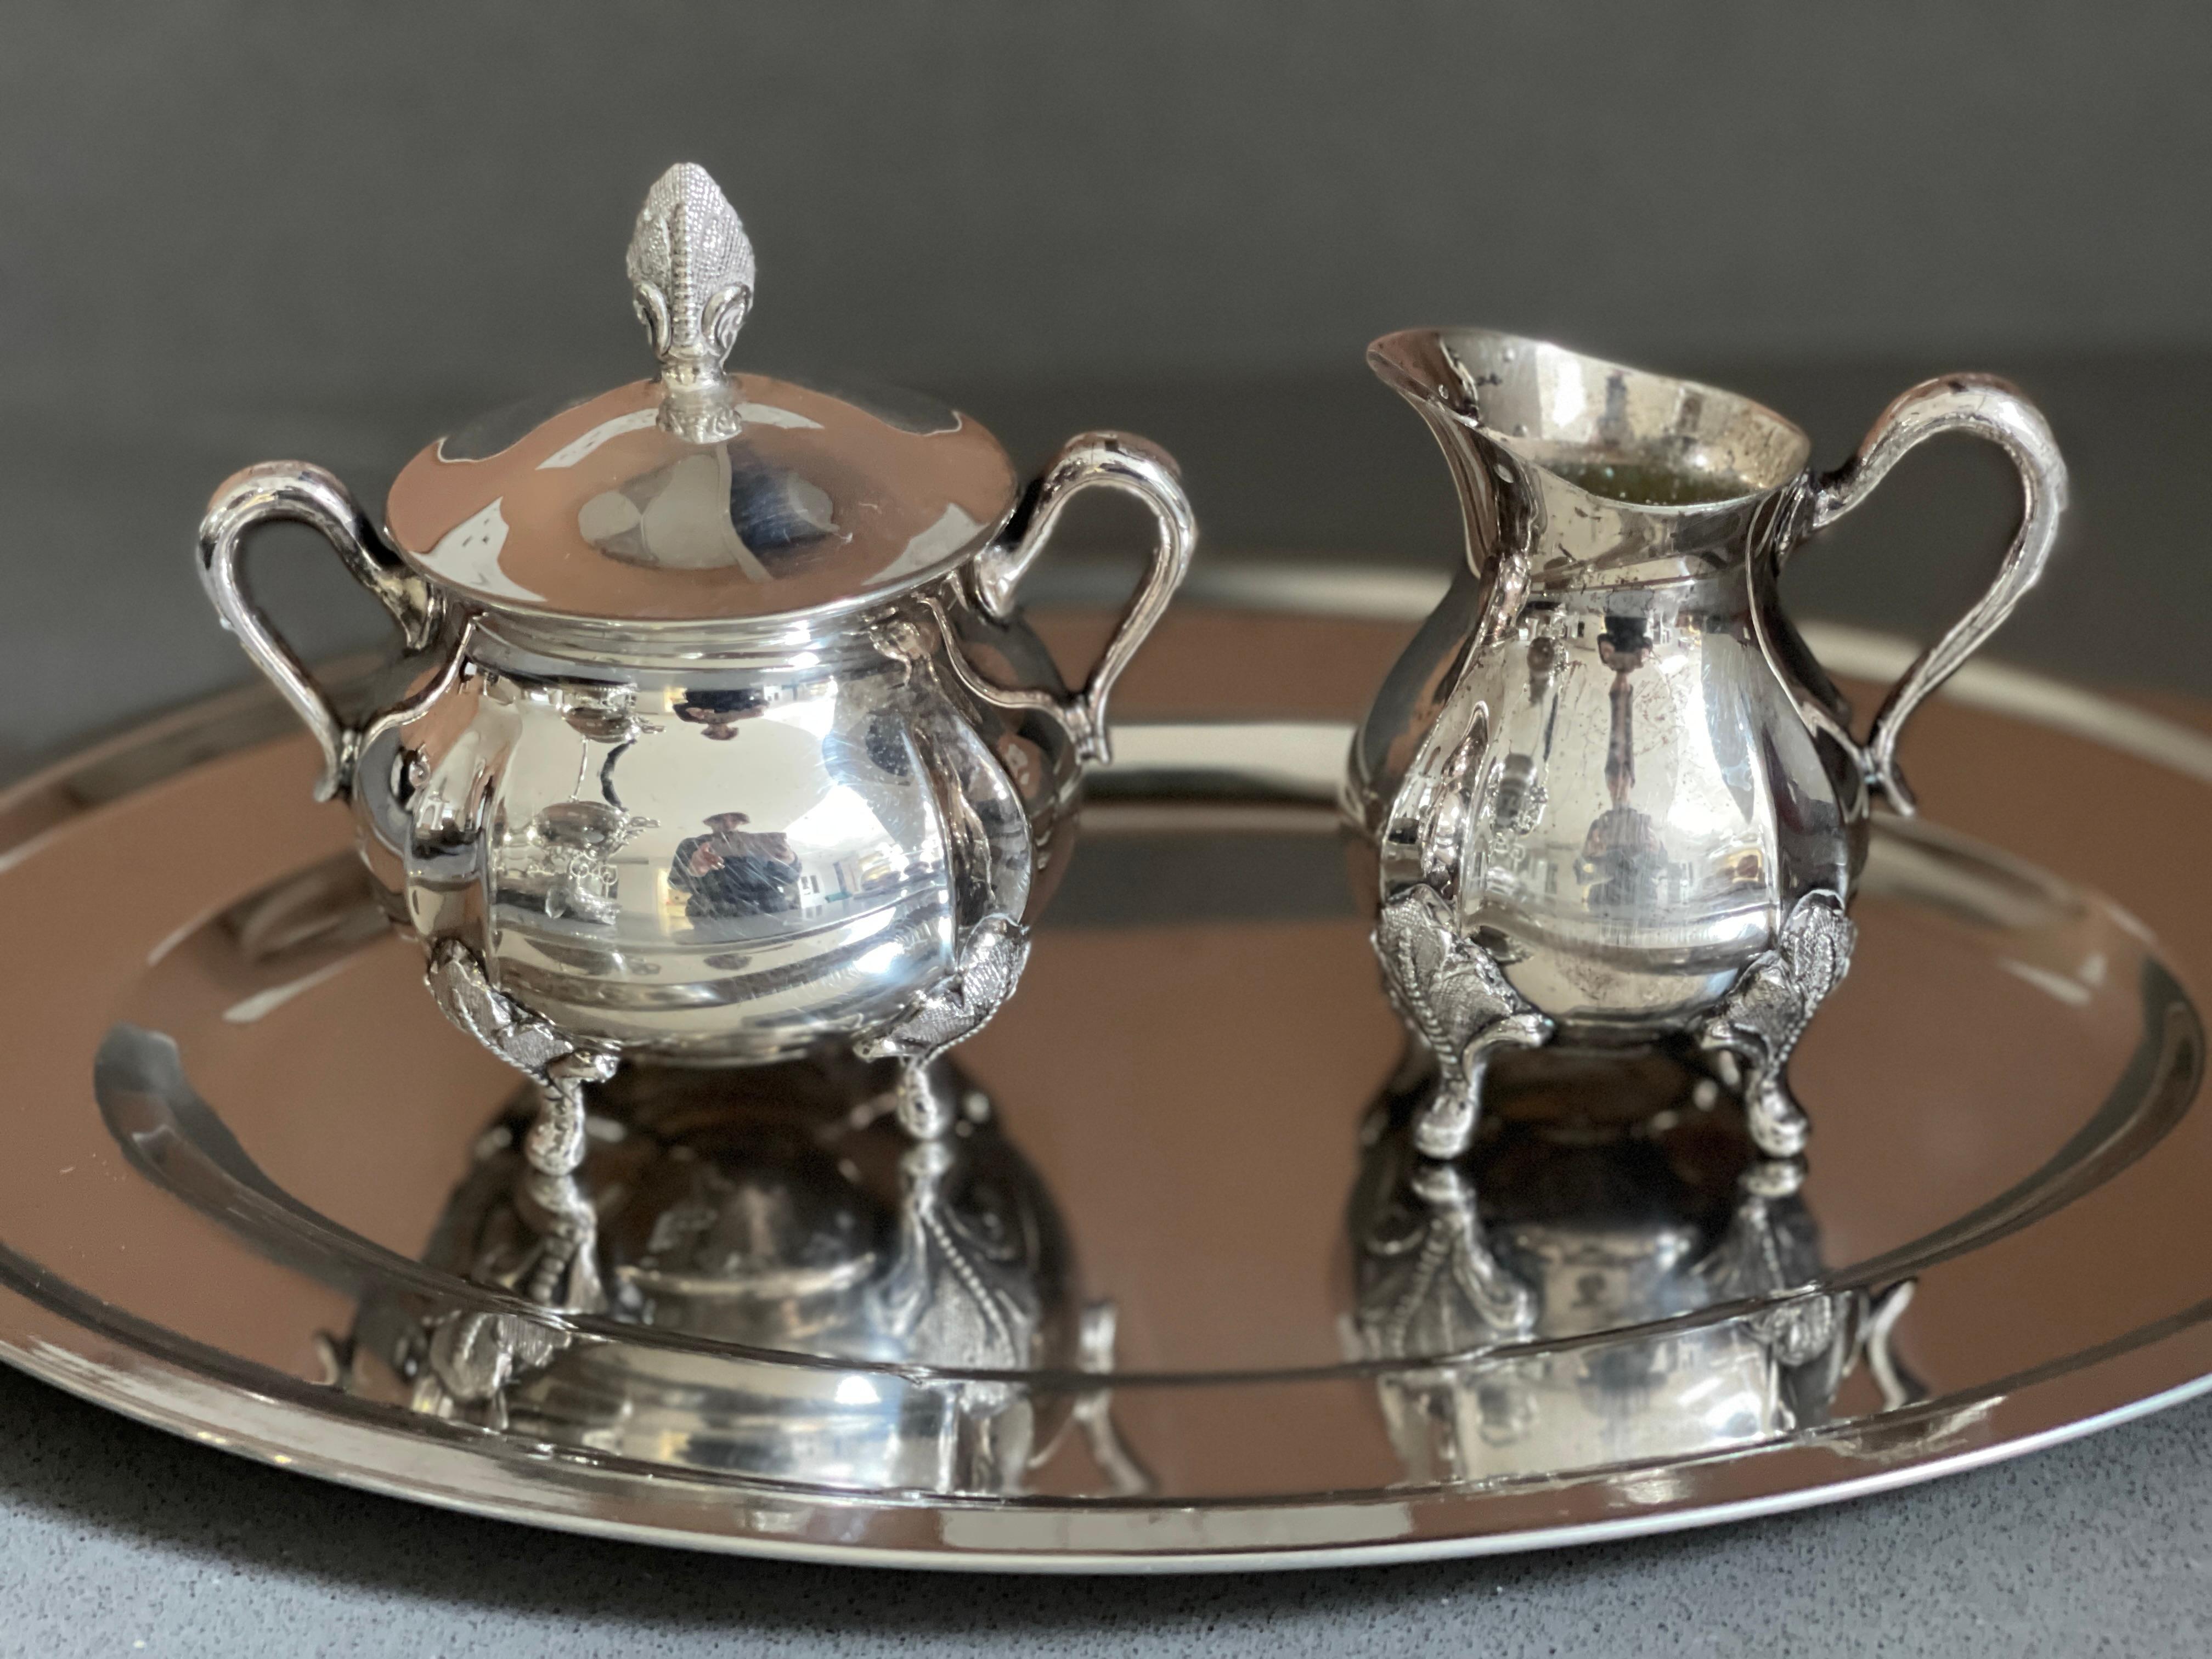 Art Deco Antique Tea Set 3 Part English Silver, Serving Tray, Home Decorative Objects  For Sale